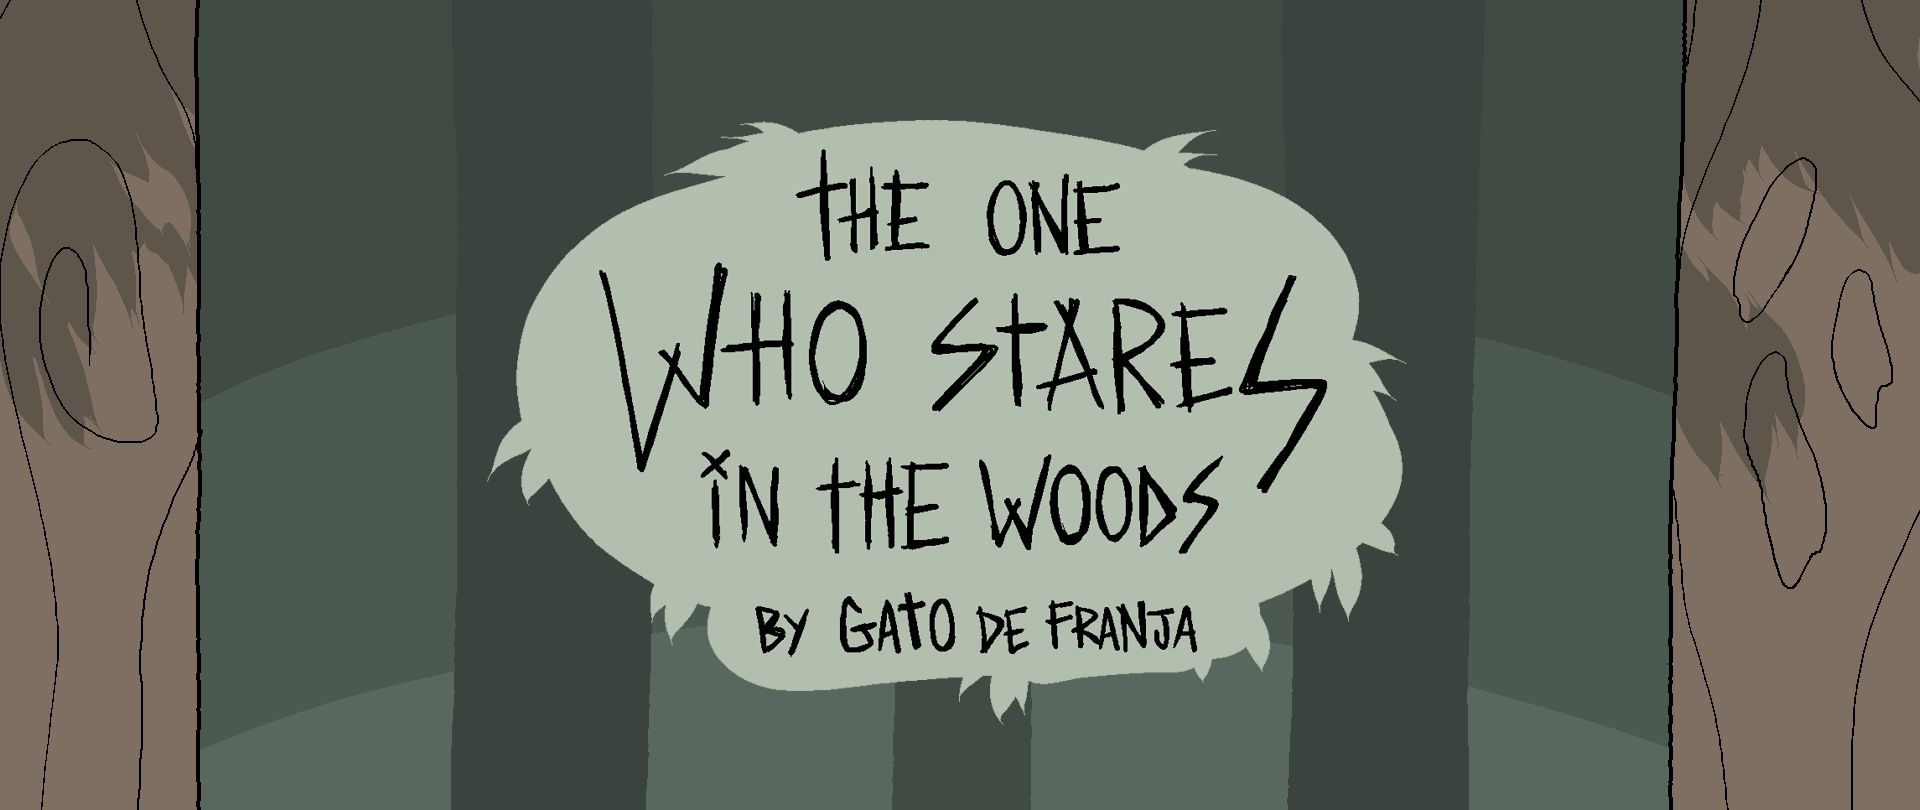 The one who stares in the woods